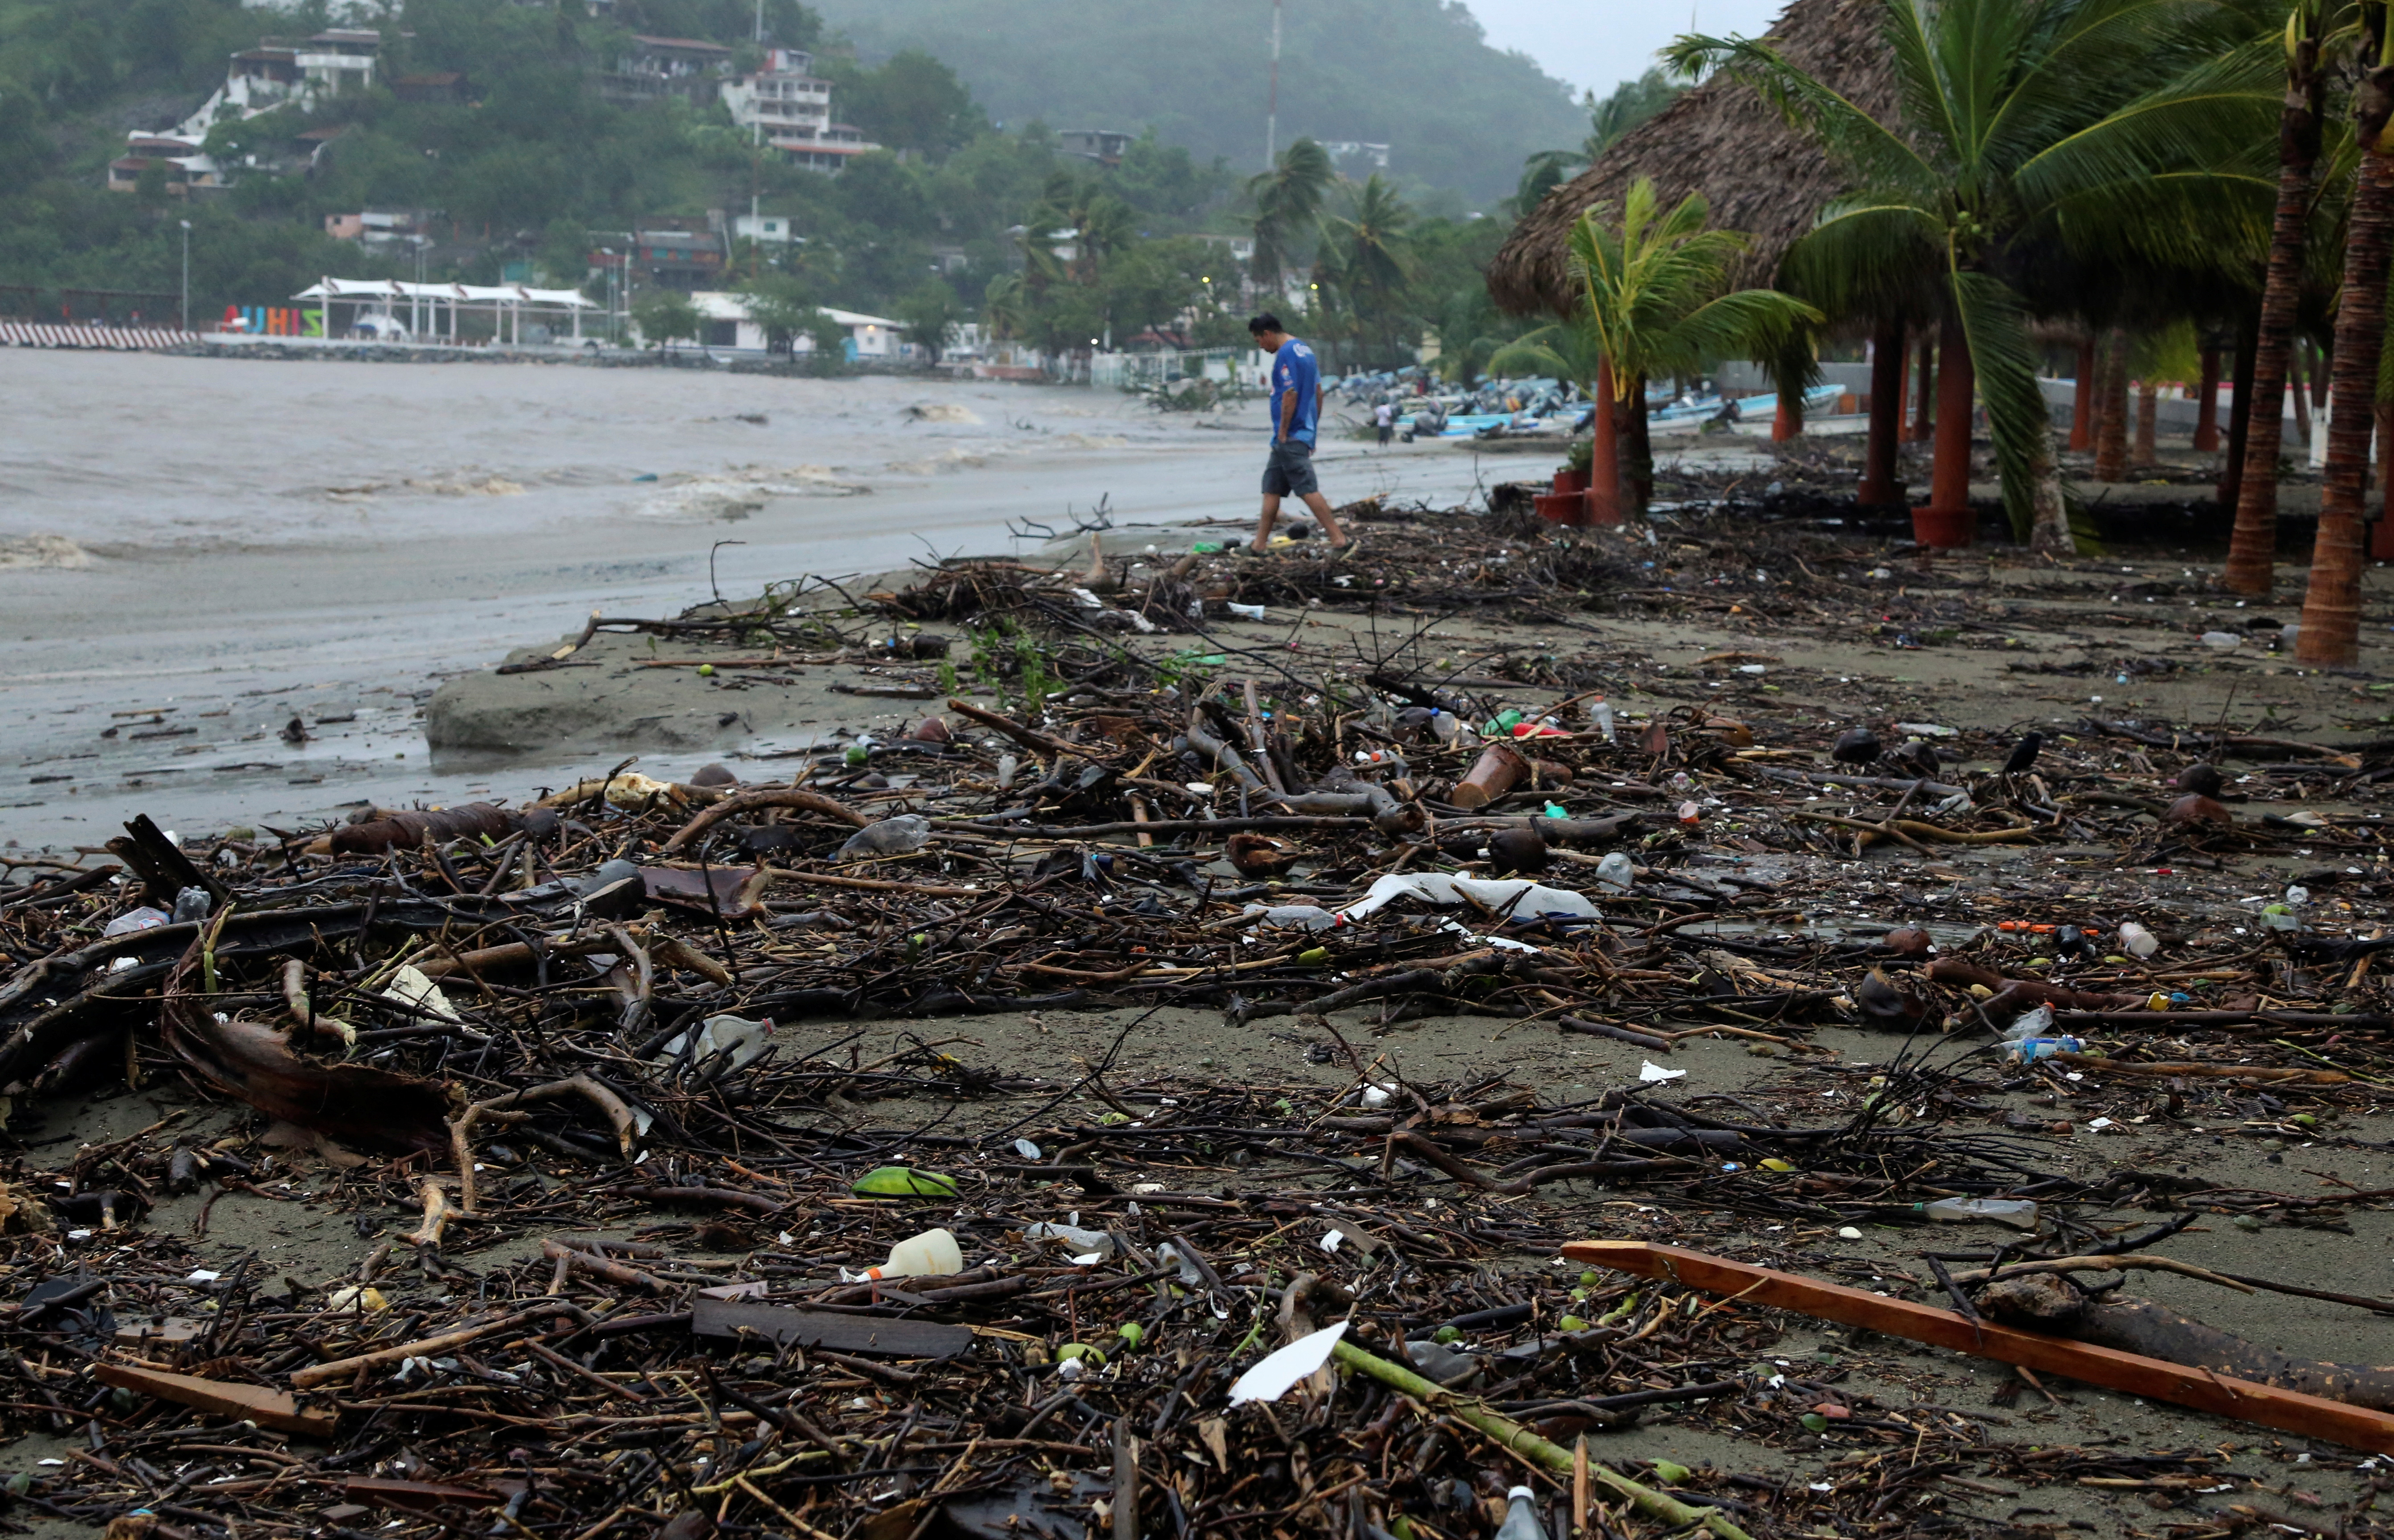 A man walks along the beach covered with tree branches and derbis after Hurricane Rick hit in Zihuatanejo, in Guerrero state, Mexico October 25, 2021. REUTERS/Javier Verdin